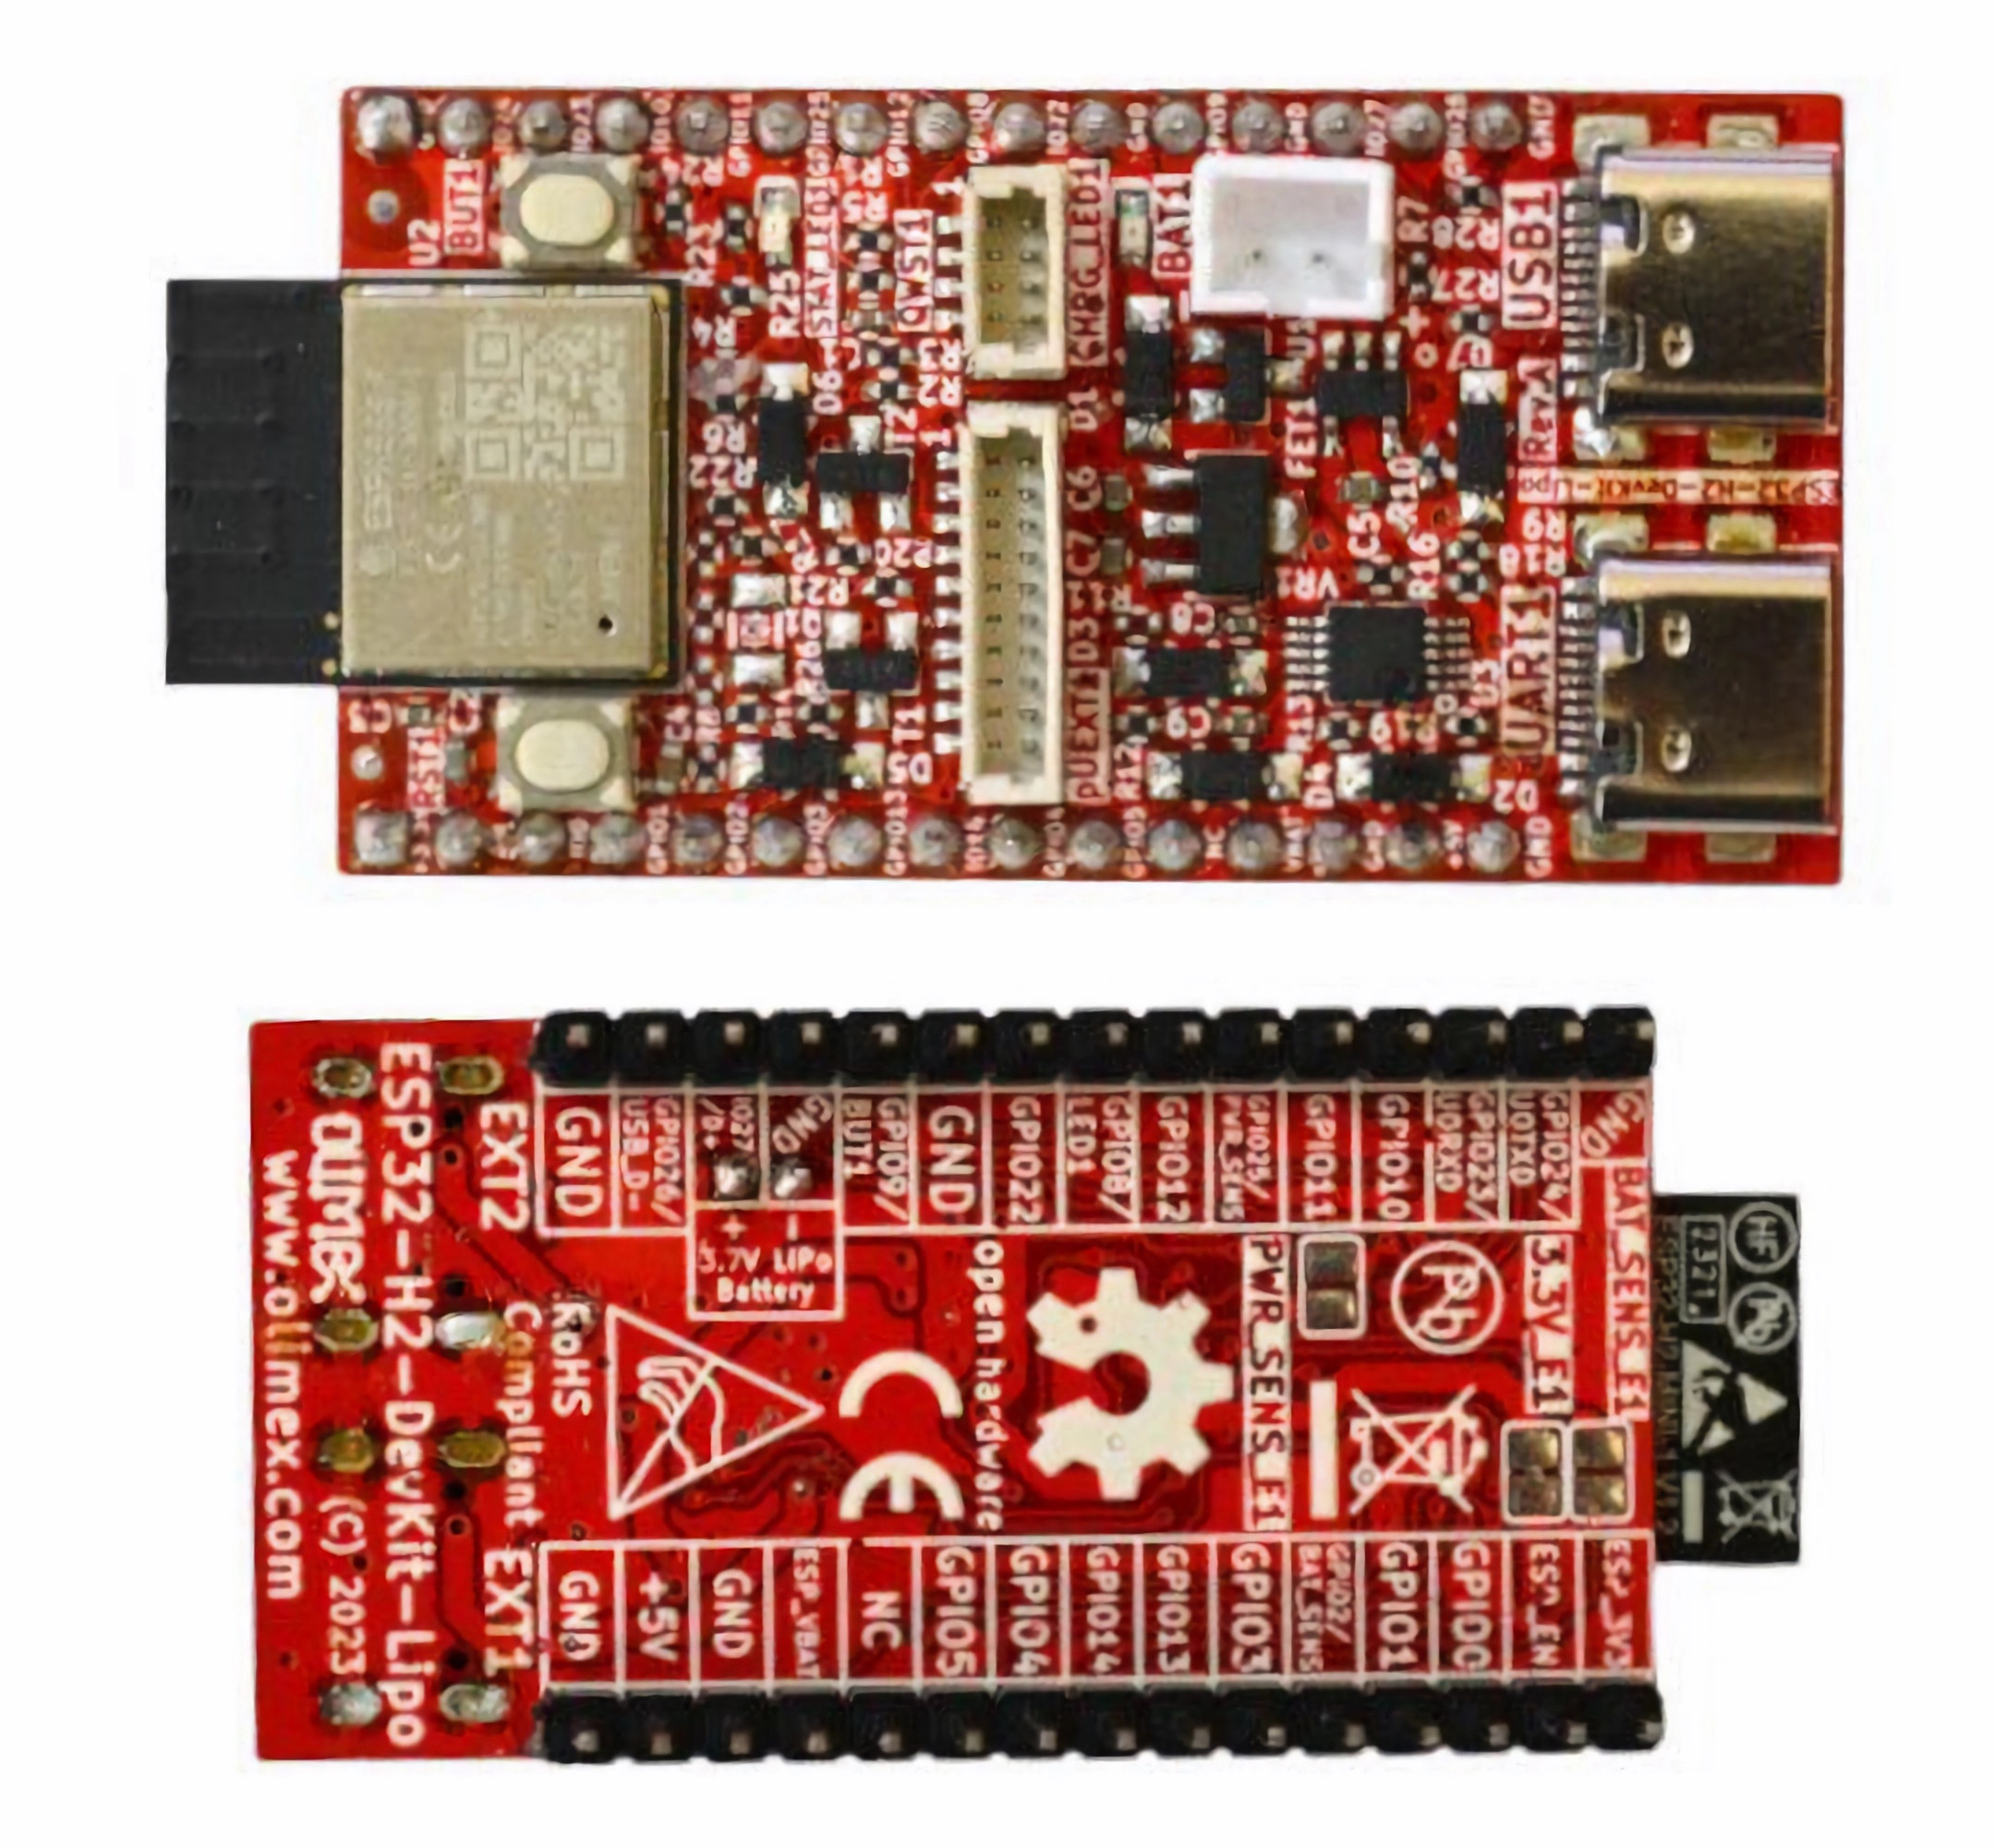 8 Euros ESP32-H2-DevKit-LiPo is an open-source hardware Bluetooth 5 LE and  802.15.4 (Zigbee/Thread/Matter) board - CNX Software